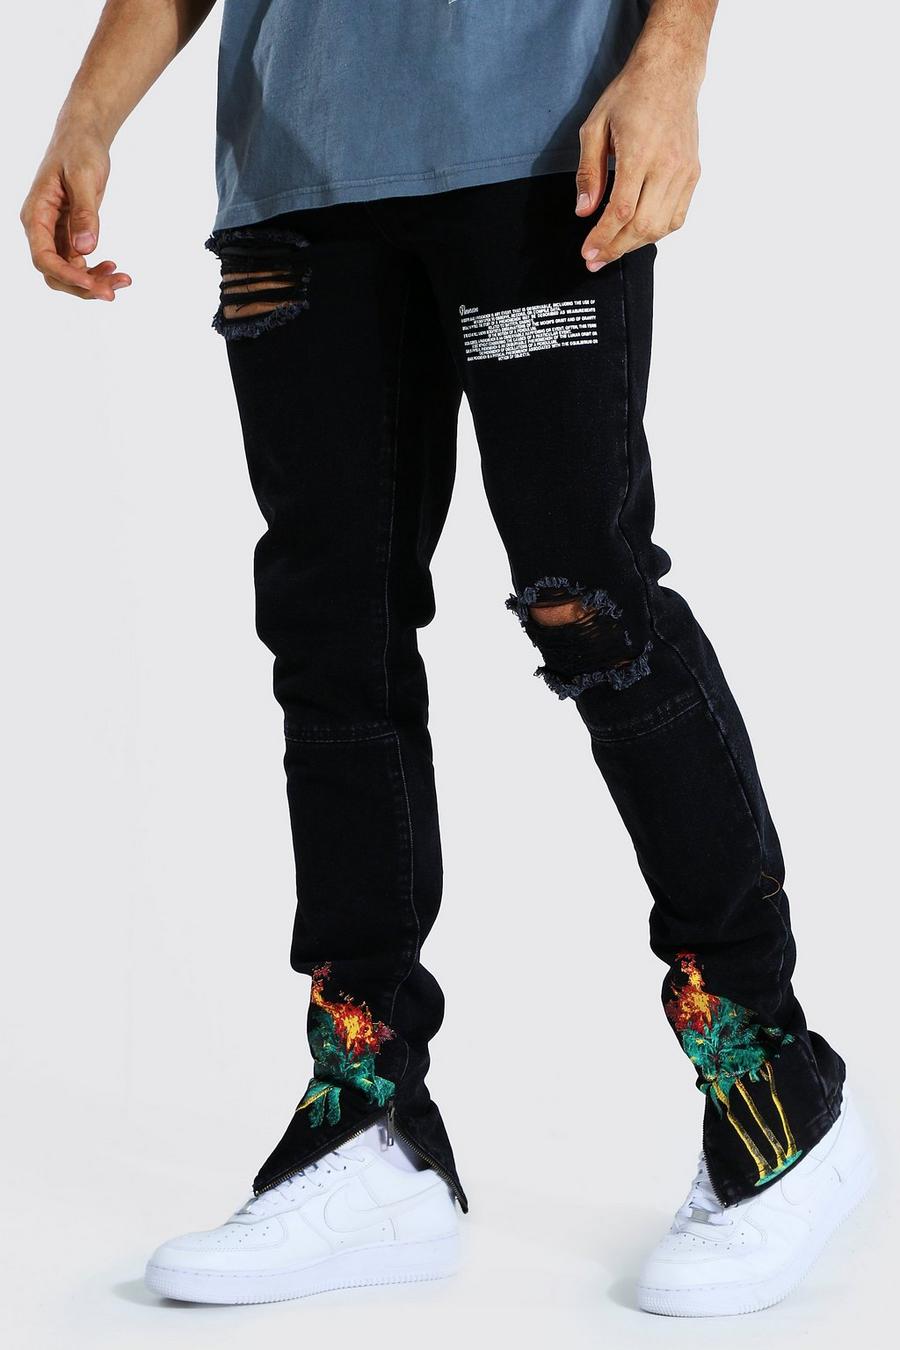 Black Tall Palmbomen Skinny Jeans image number 1